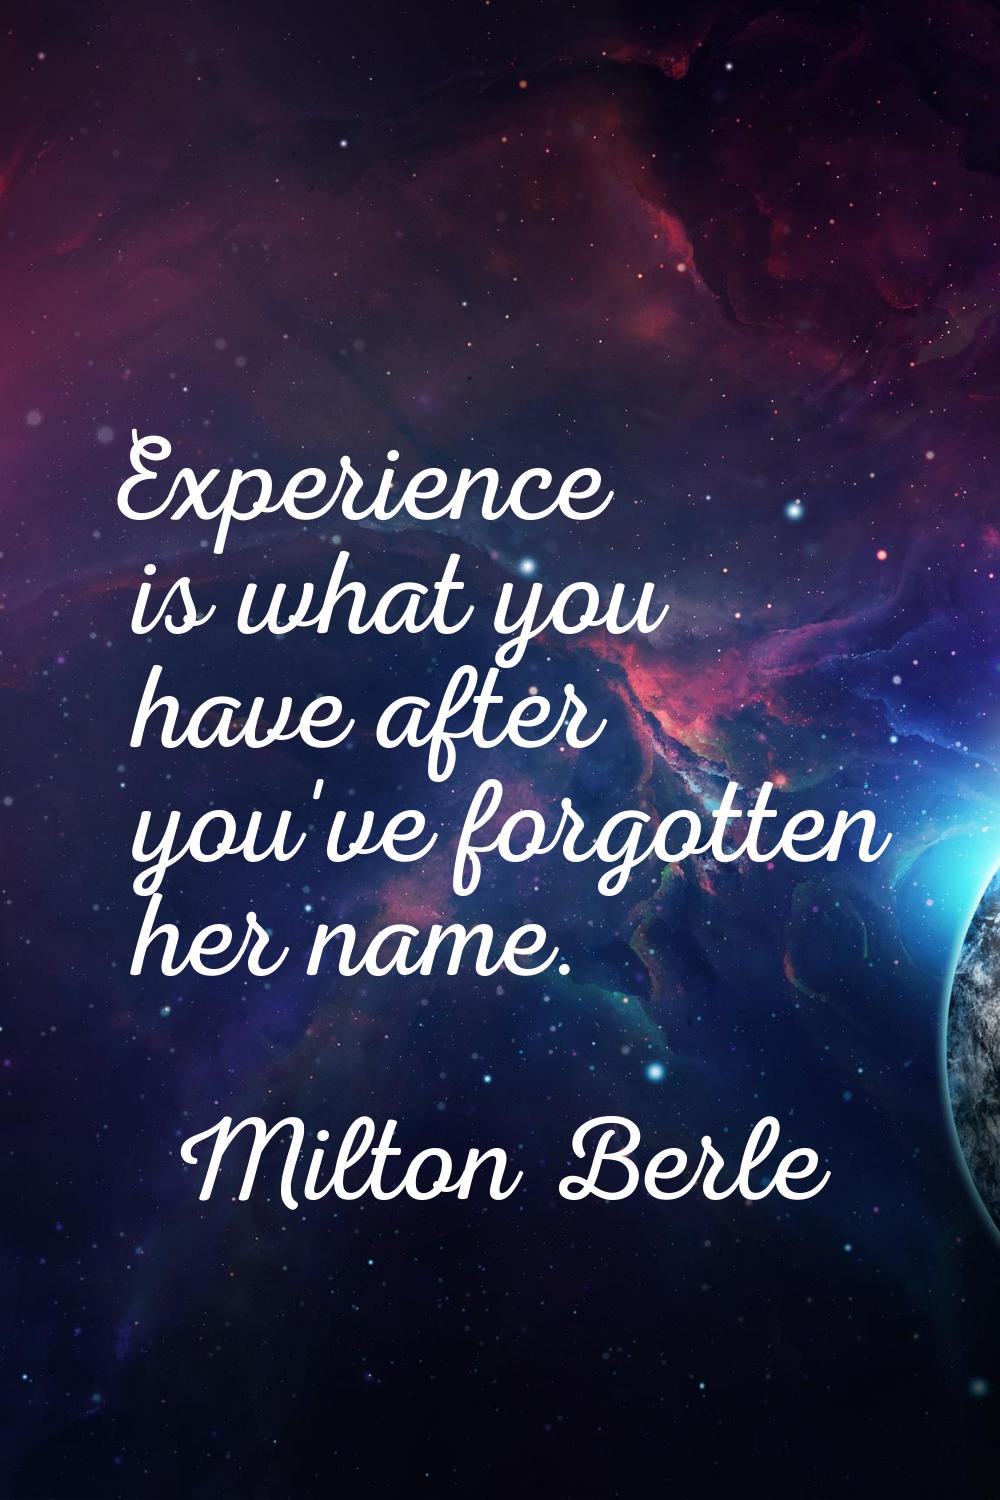 Experience is what you have after you've forgotten her name.